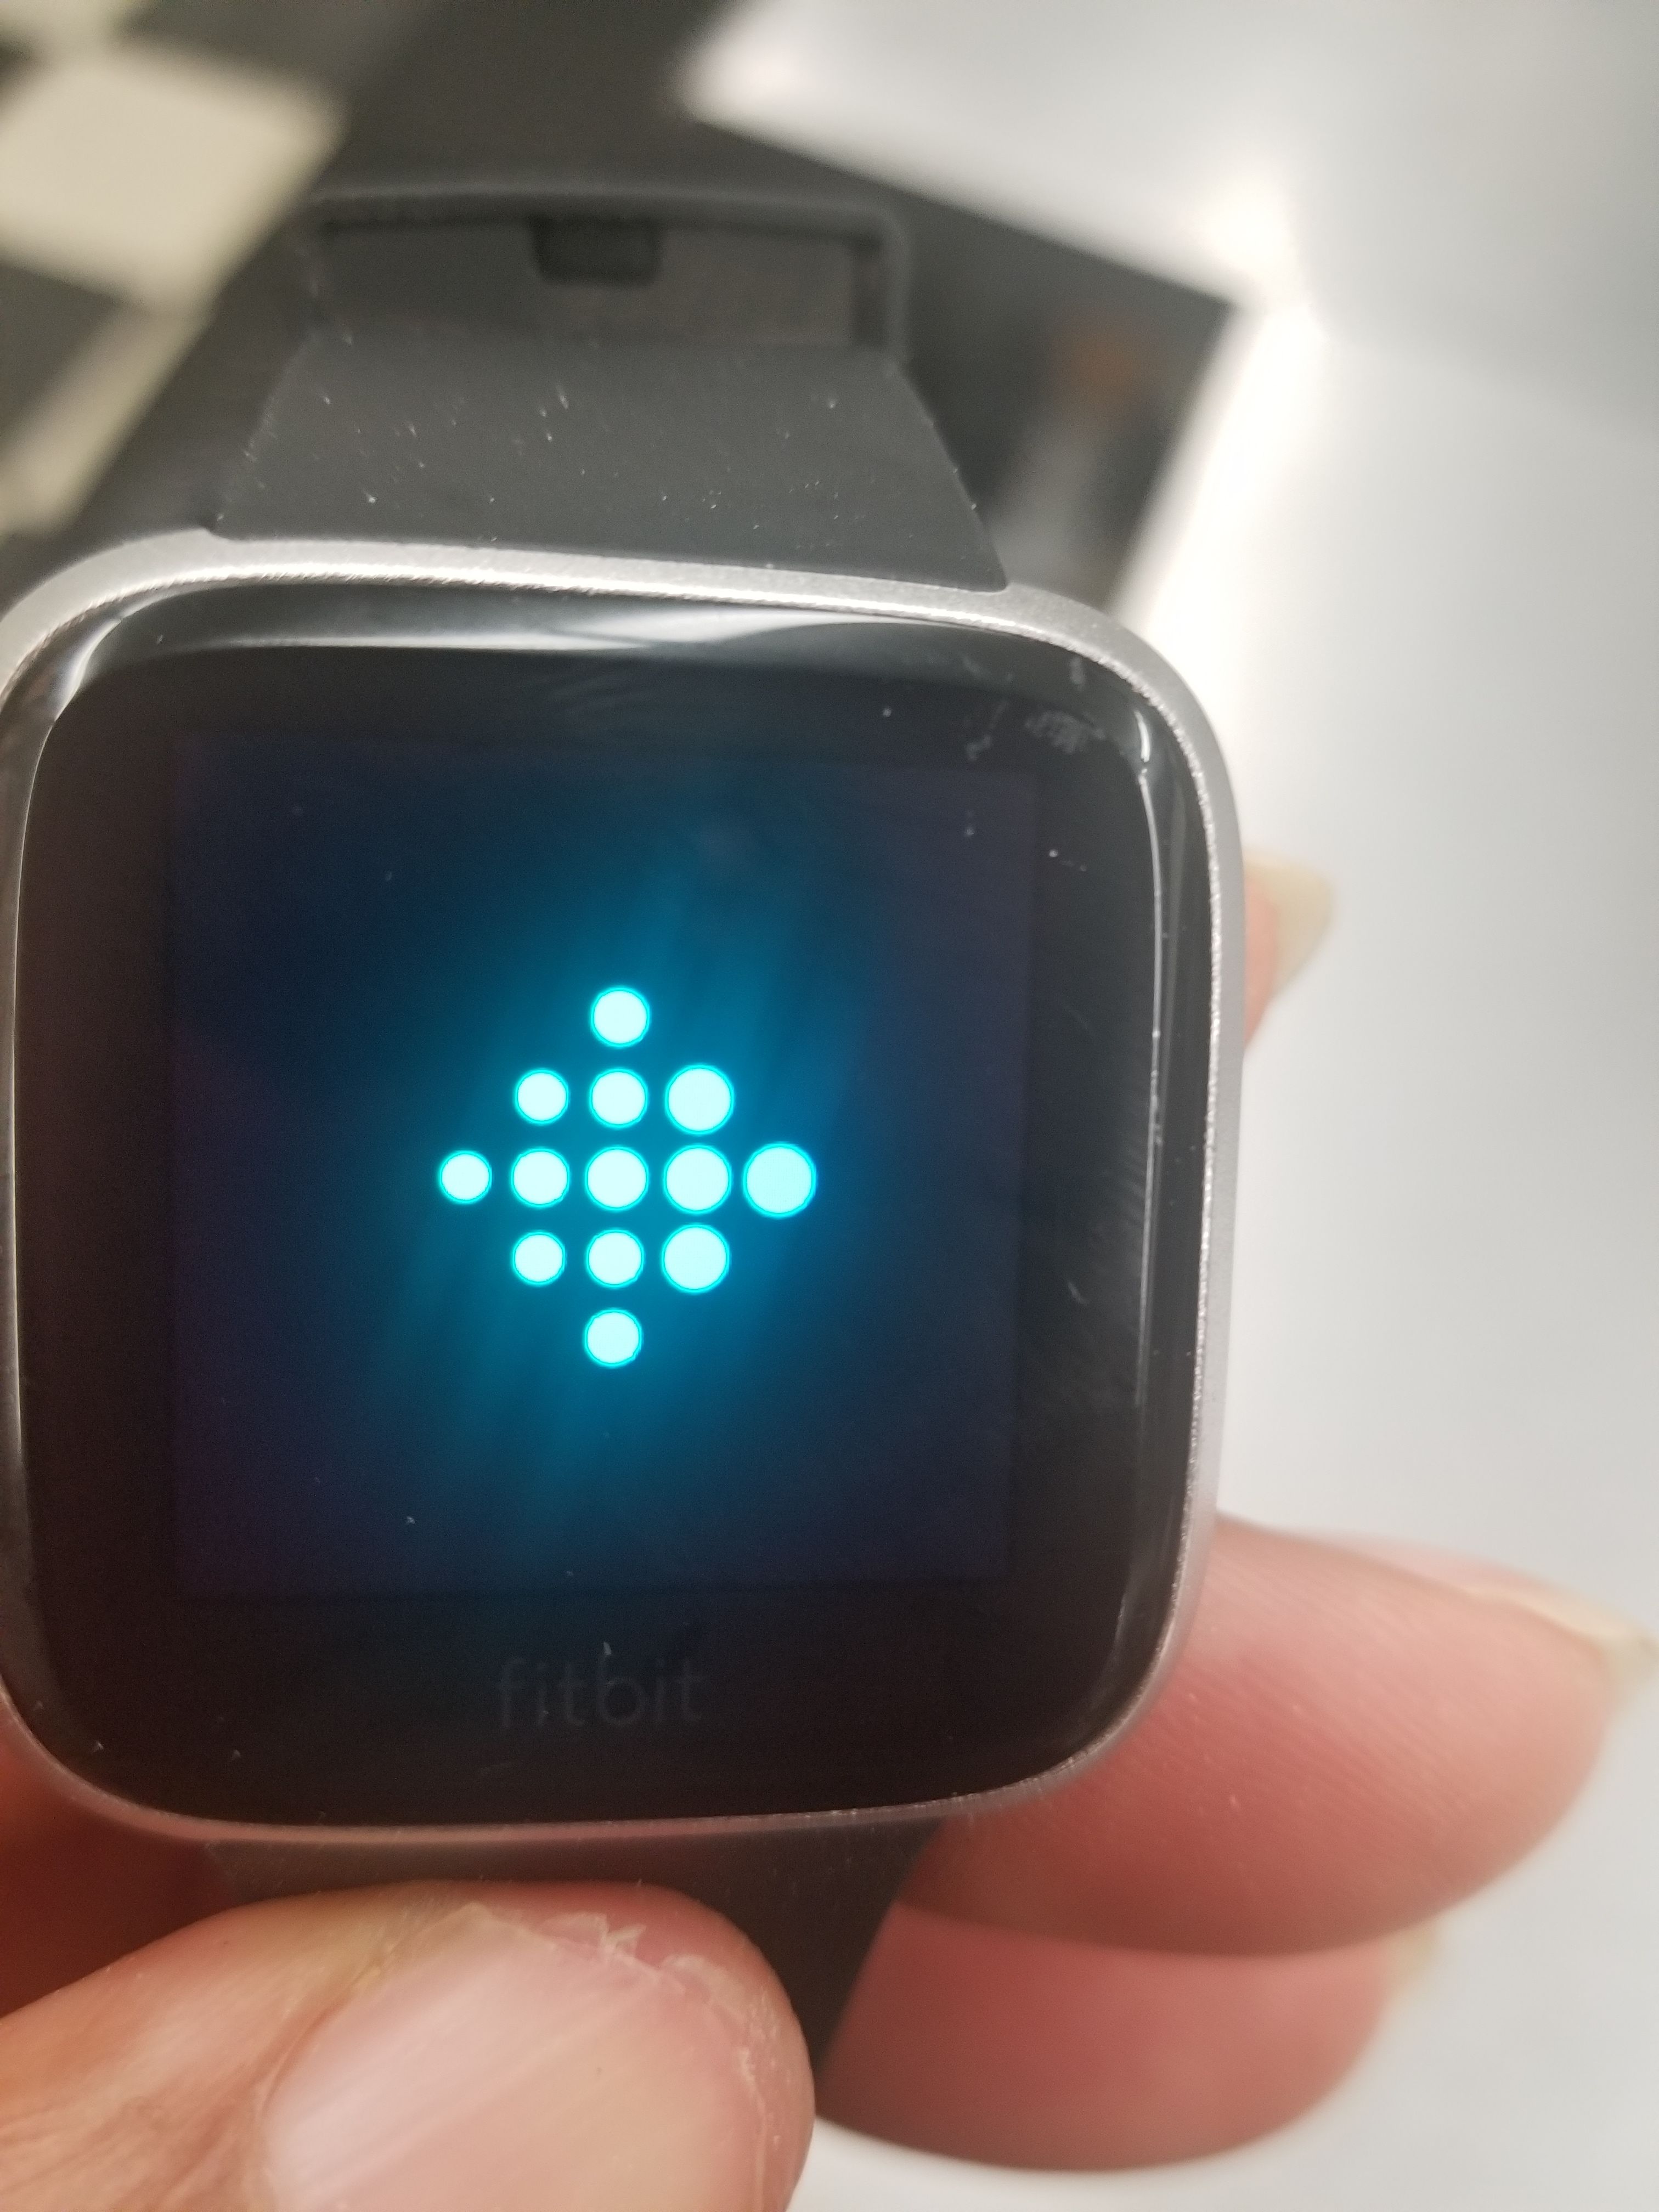 Solved: Versa Lite stopped working 